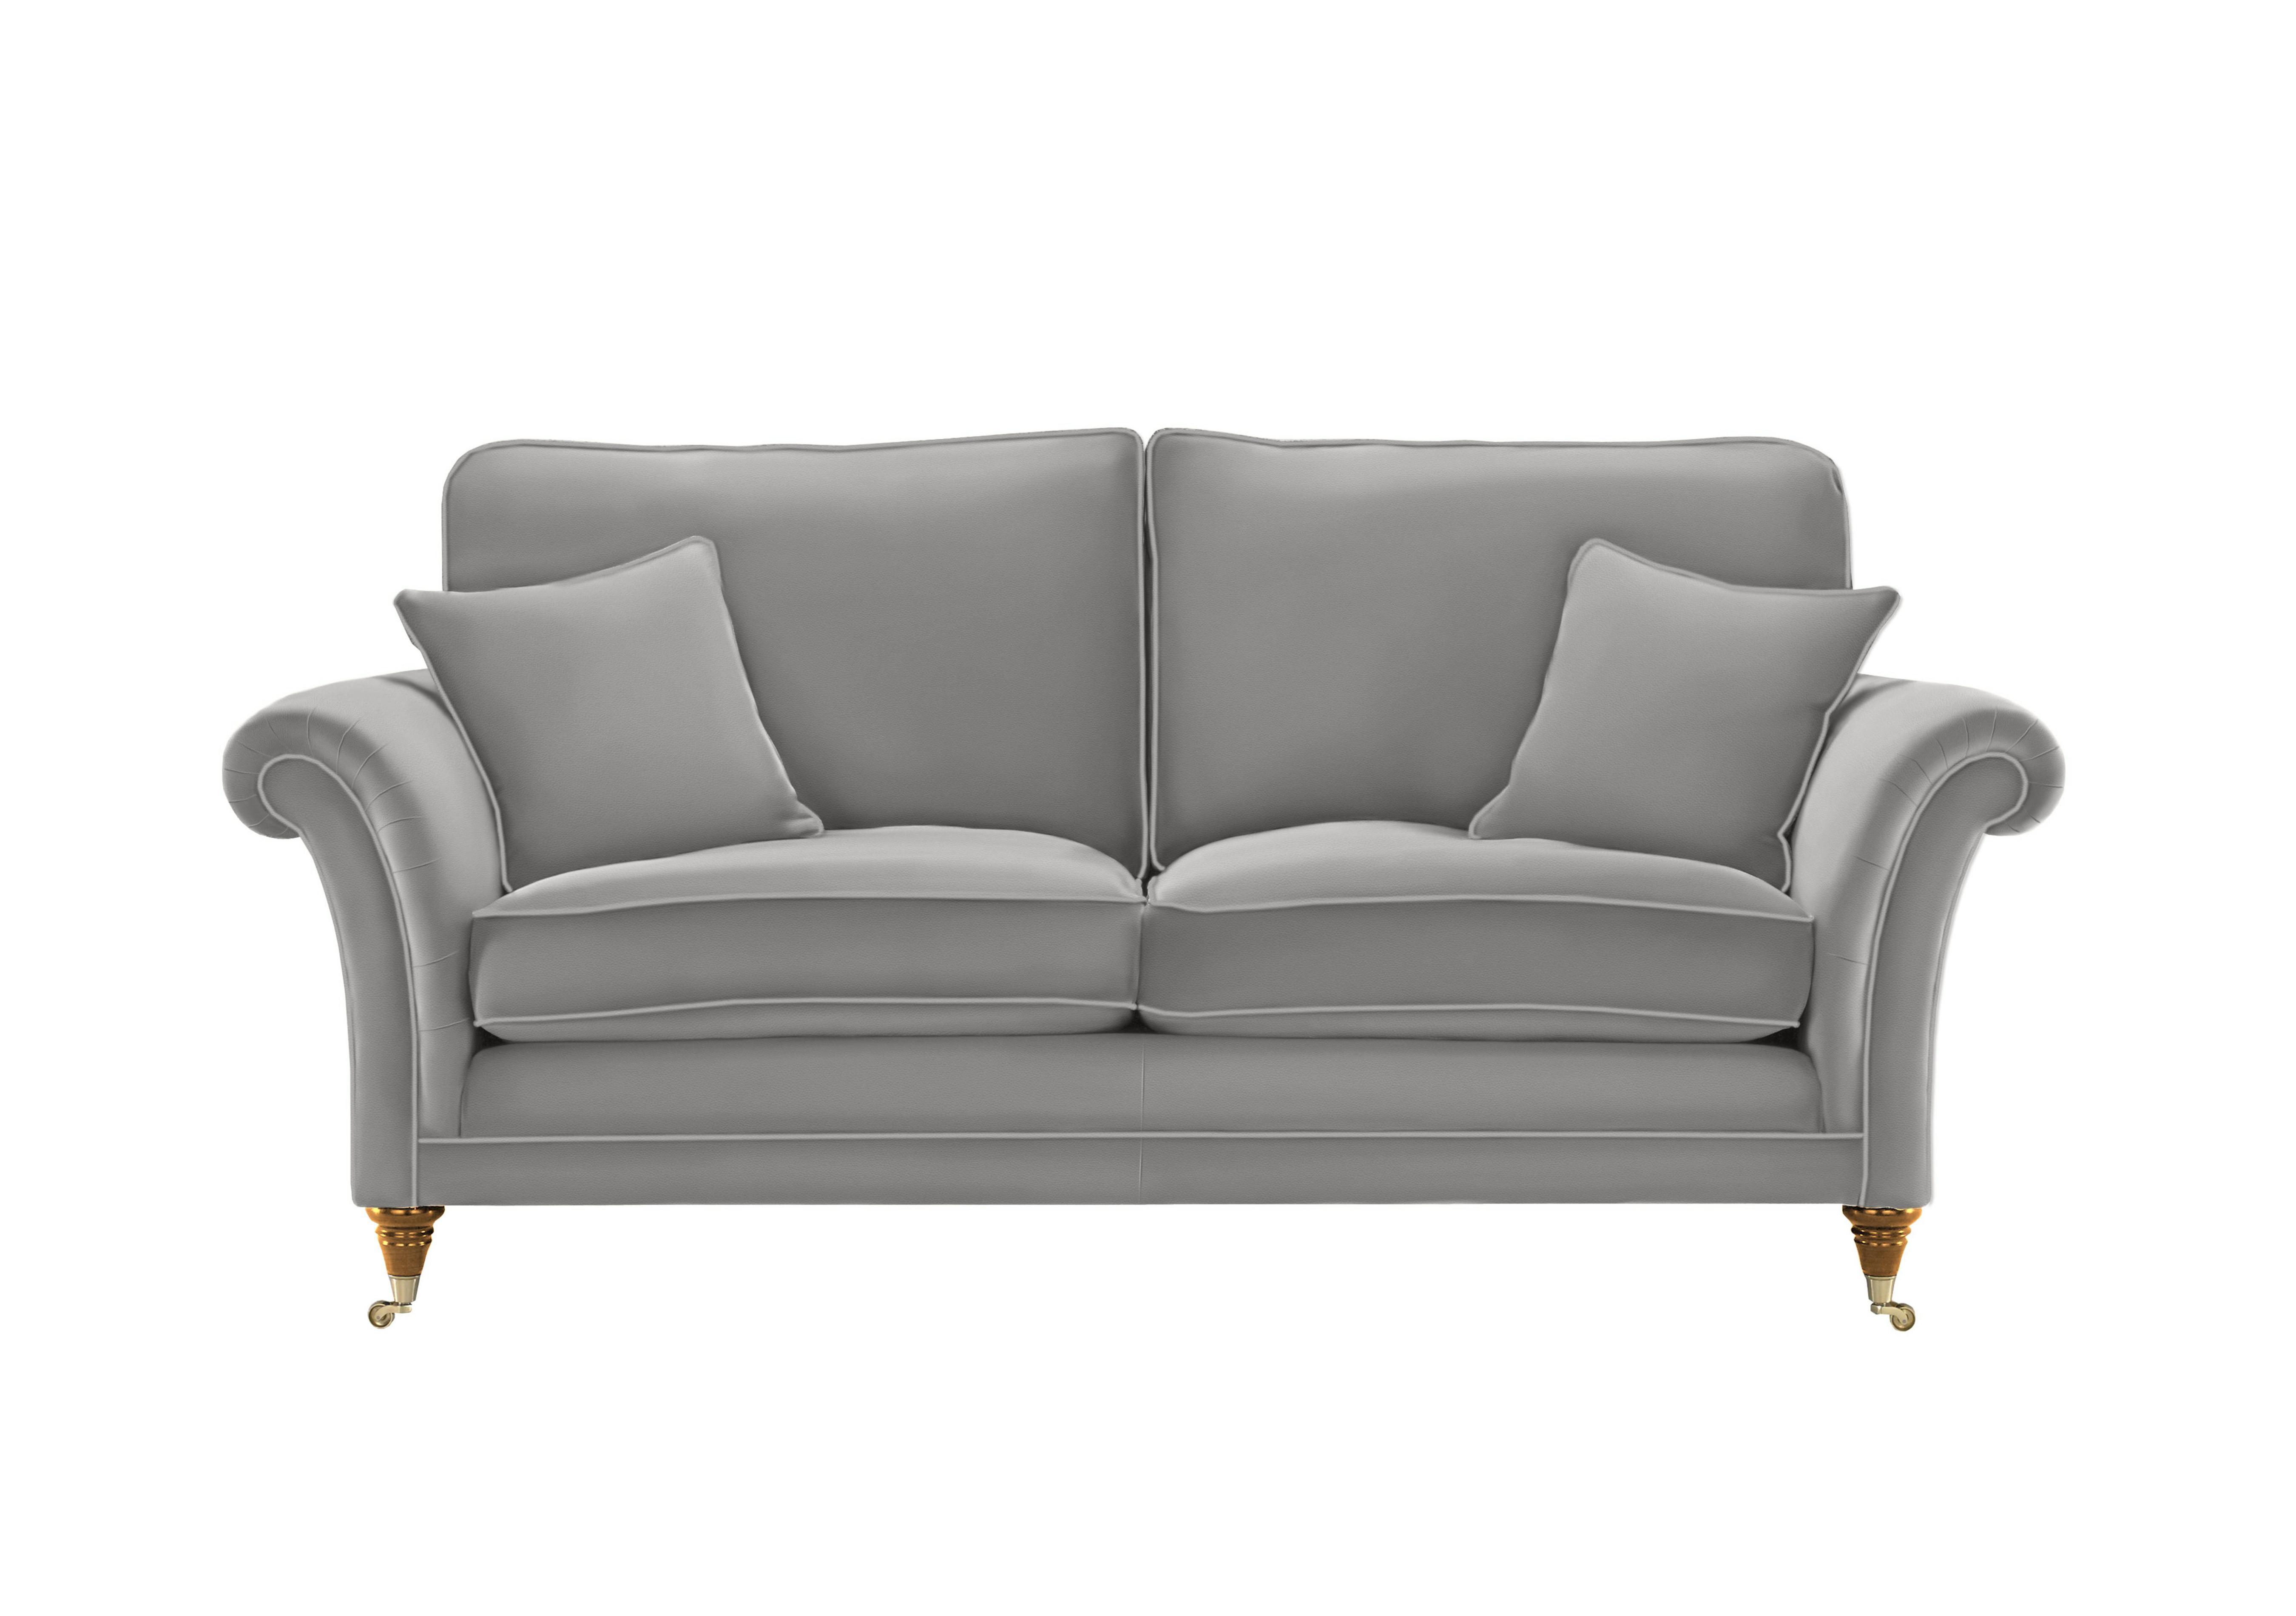 Burghley Large 2 Seater Leather Sofa in 009019-0092 Roma Steel on Furniture Village